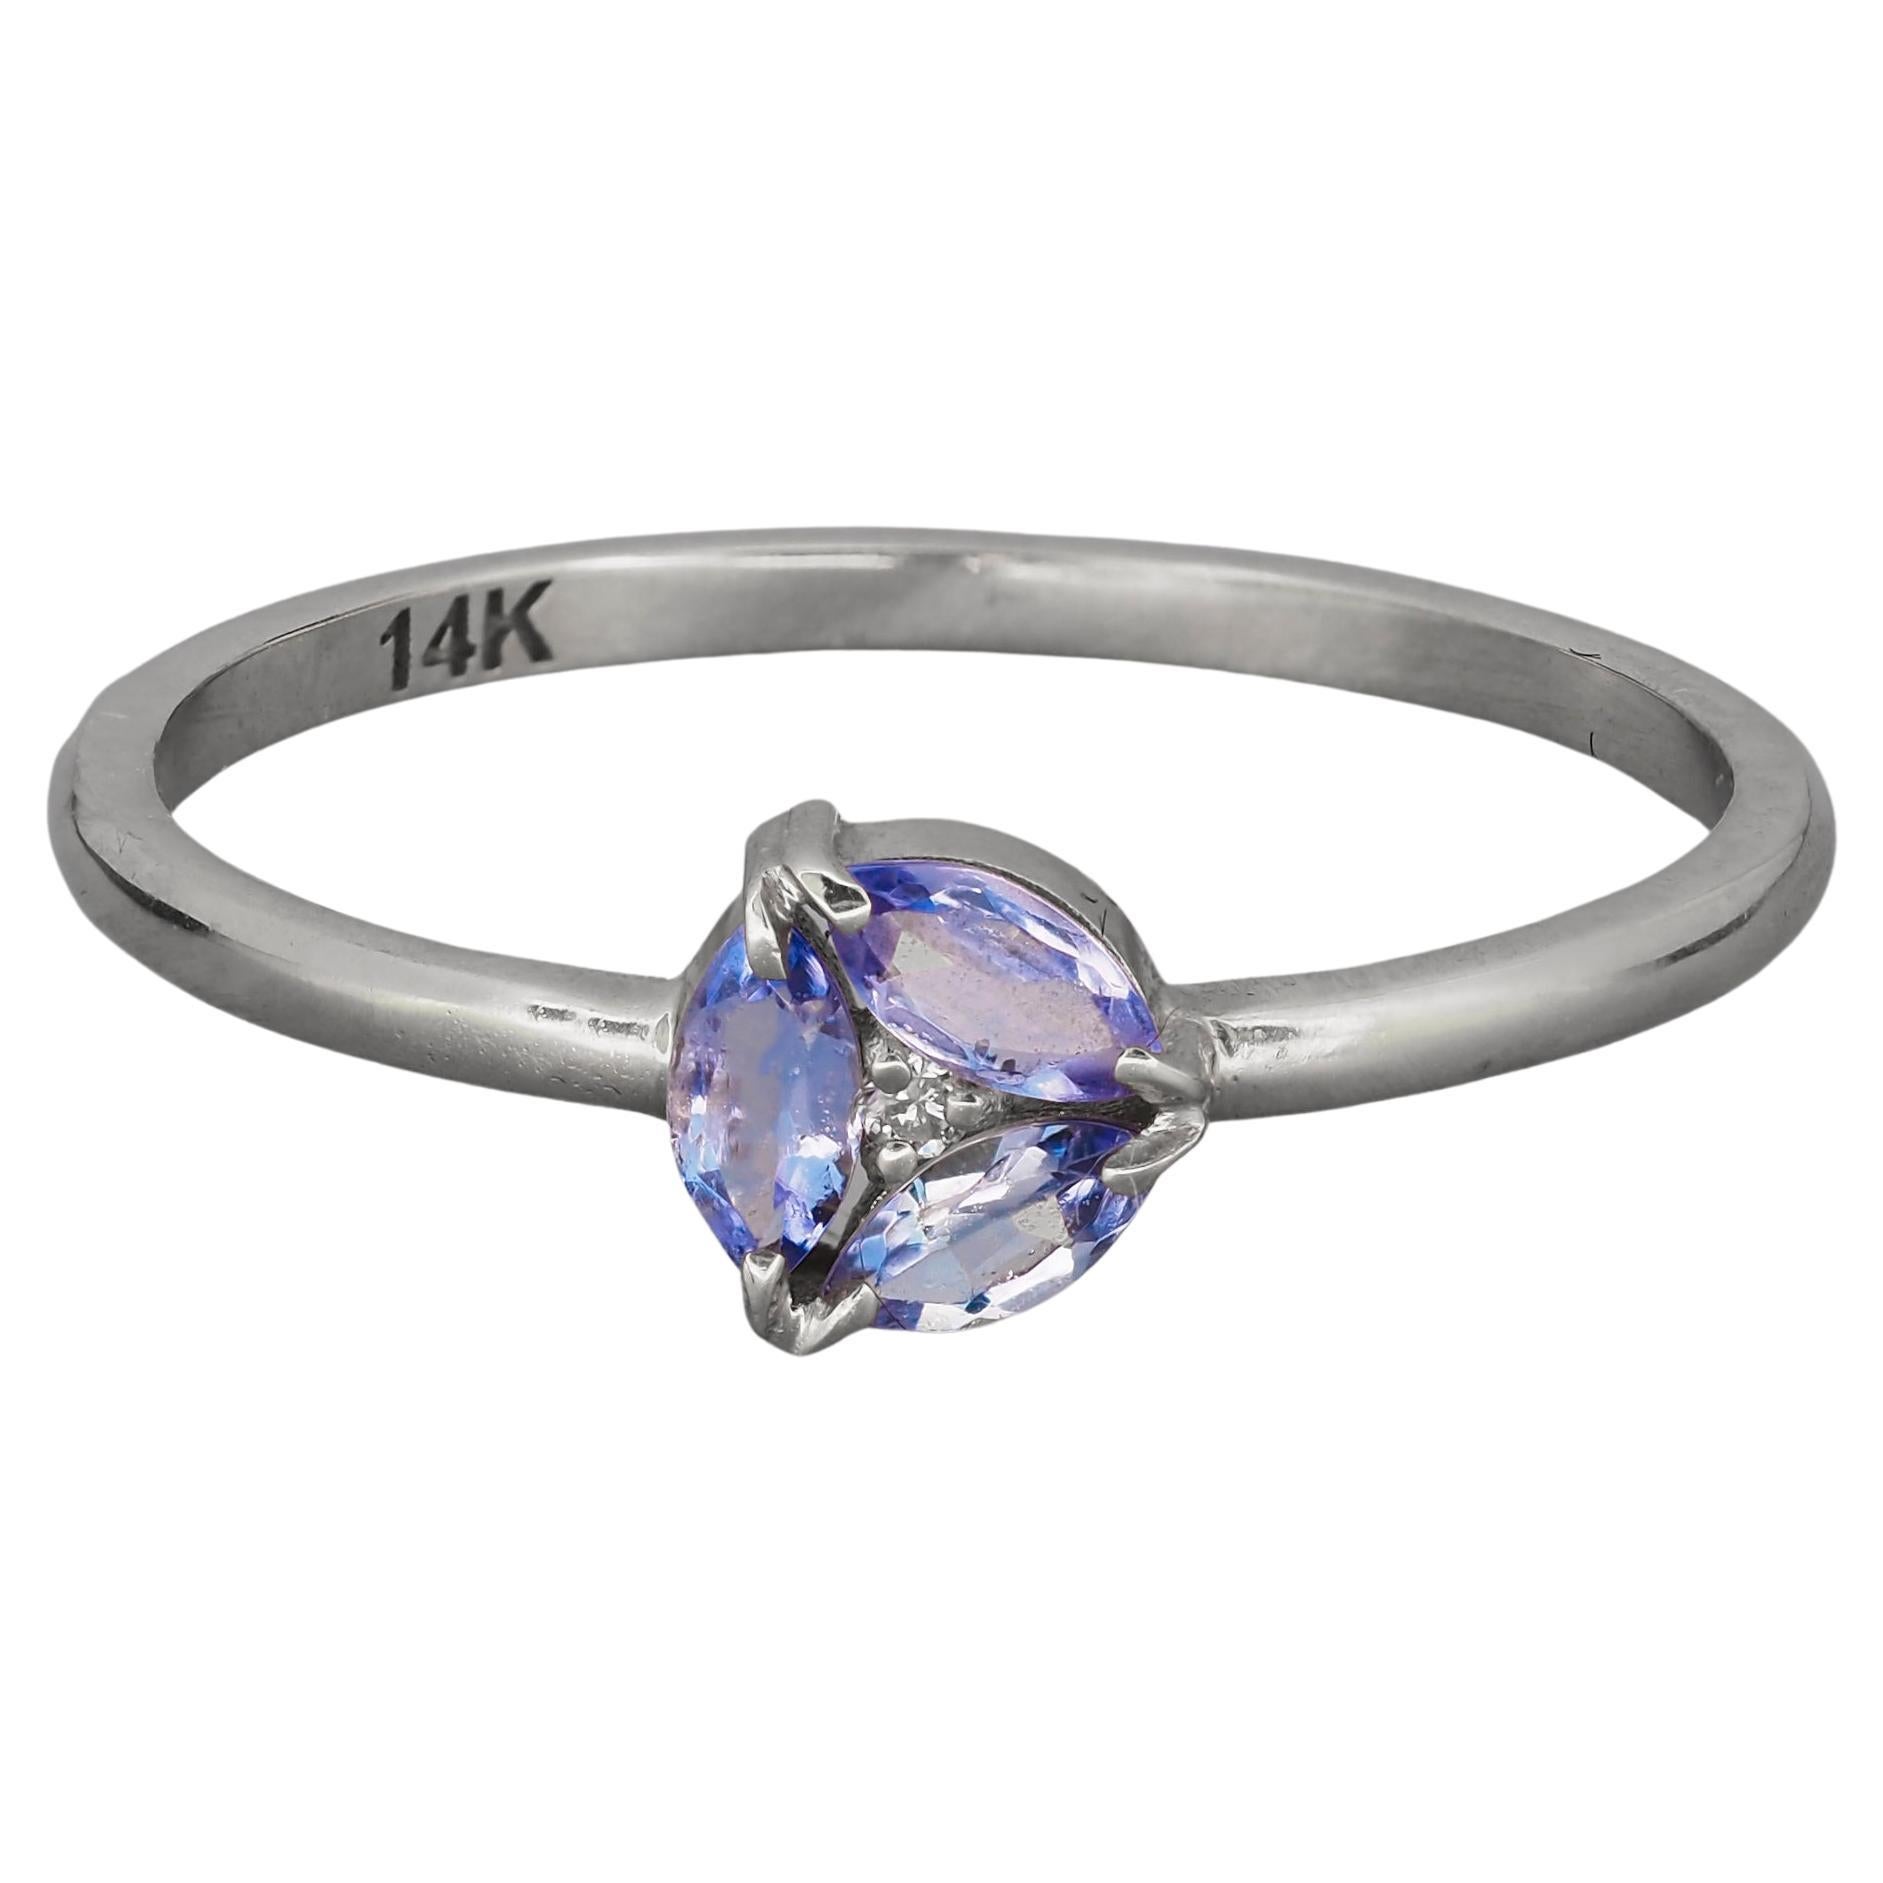 For Sale:  14k Gold Ring with Marquise Tanzanite and Diamonds